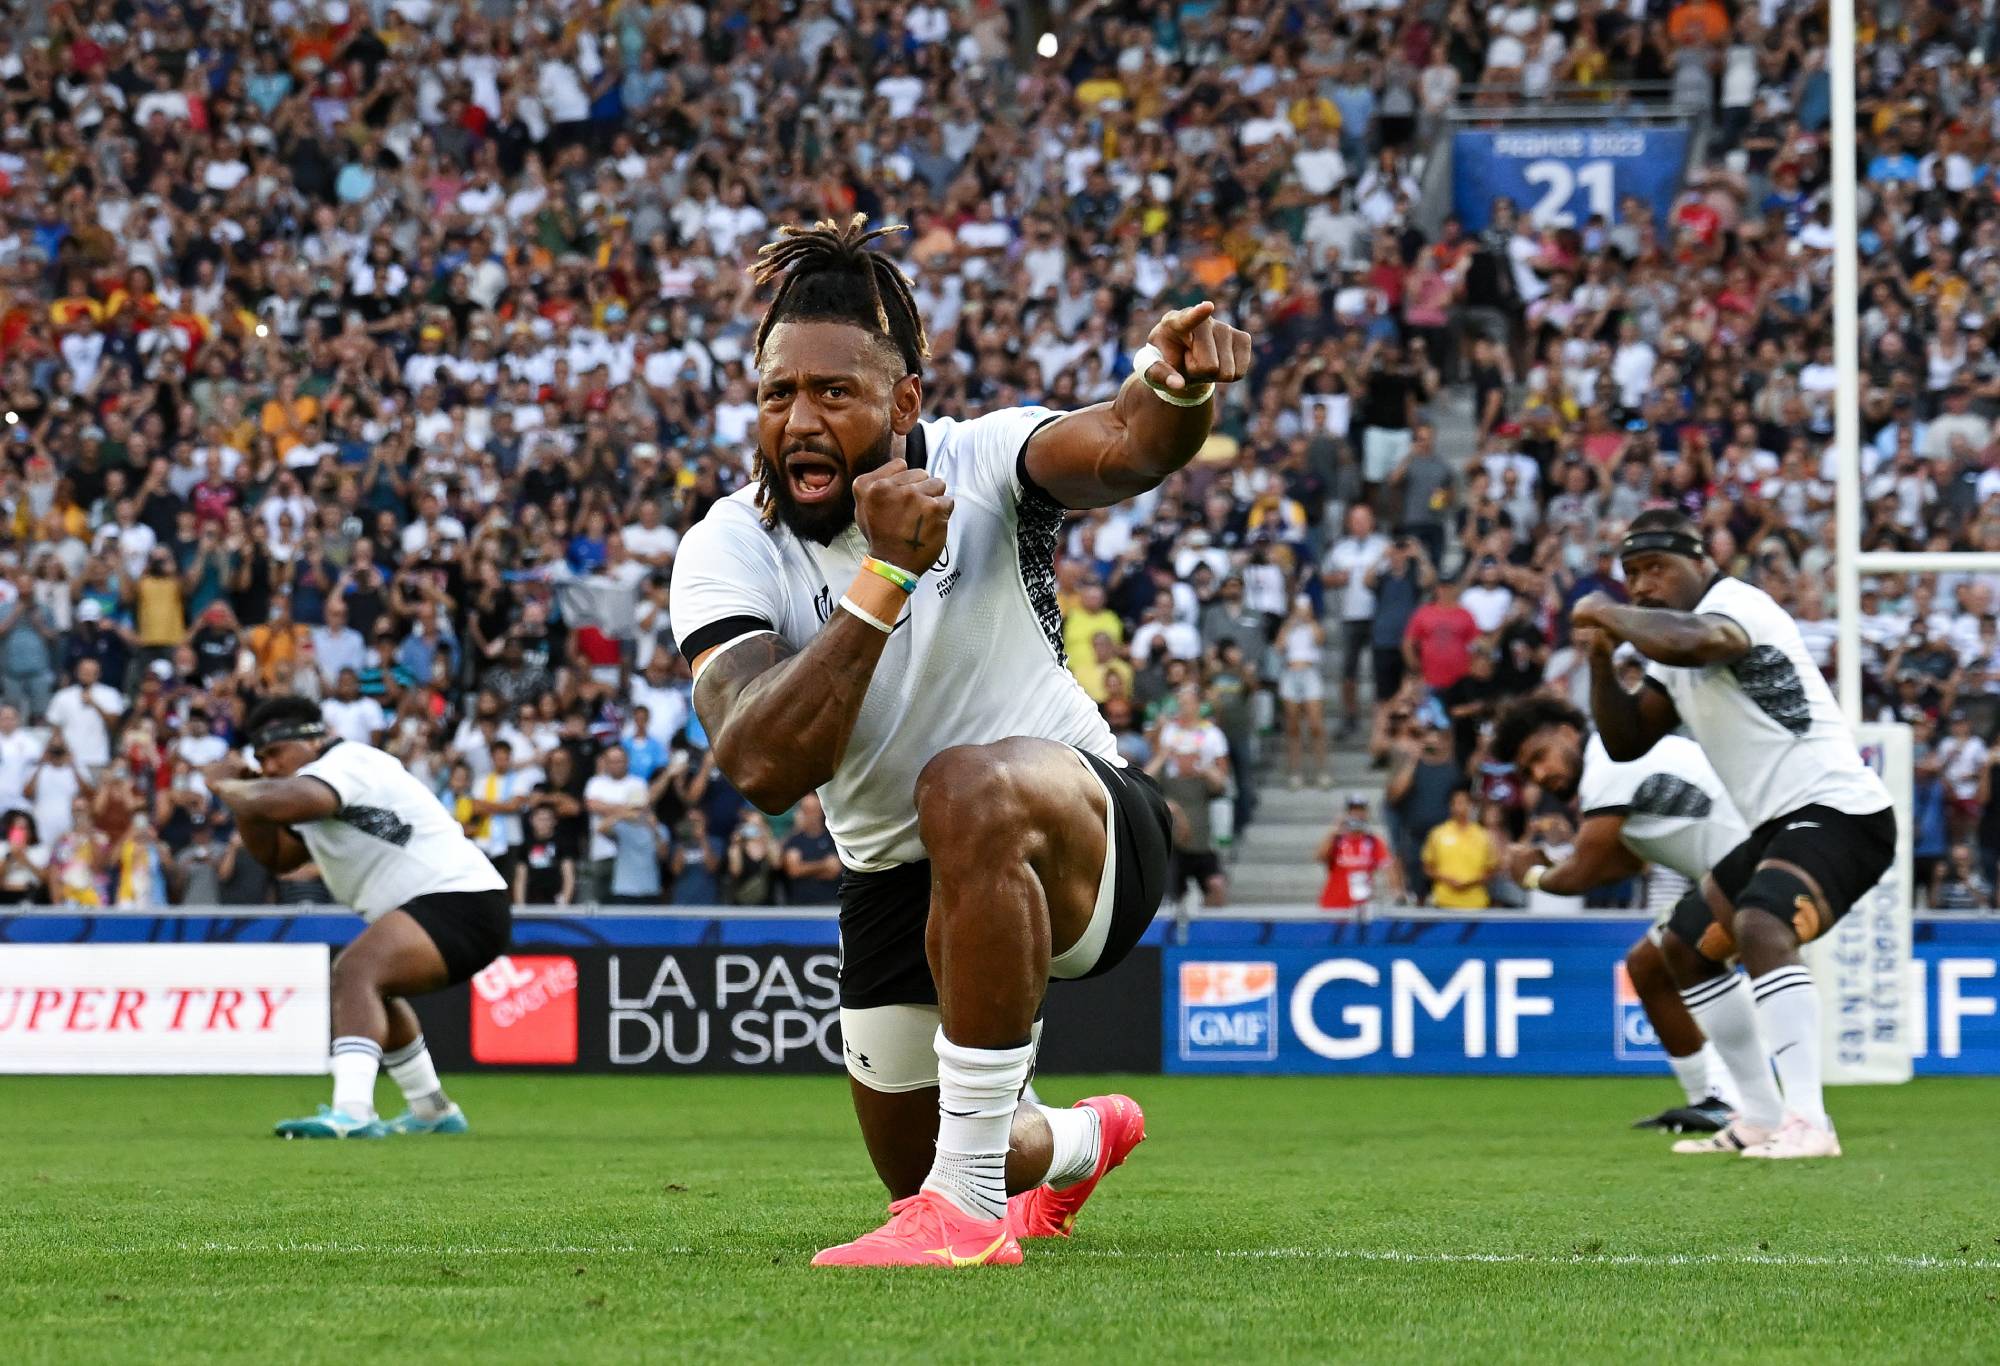 Waisea Nayacalevu of Fiji leads his teammates as players of of Fiji perform the Cibi prior to the Rugby World Cup France 2023 match between Australia and Fiji at Stade Geoffroy-Guichard on September 17, 2023 in Saint-Etienne, France. (Photo by World Rugby/World Rugby via Getty Images)